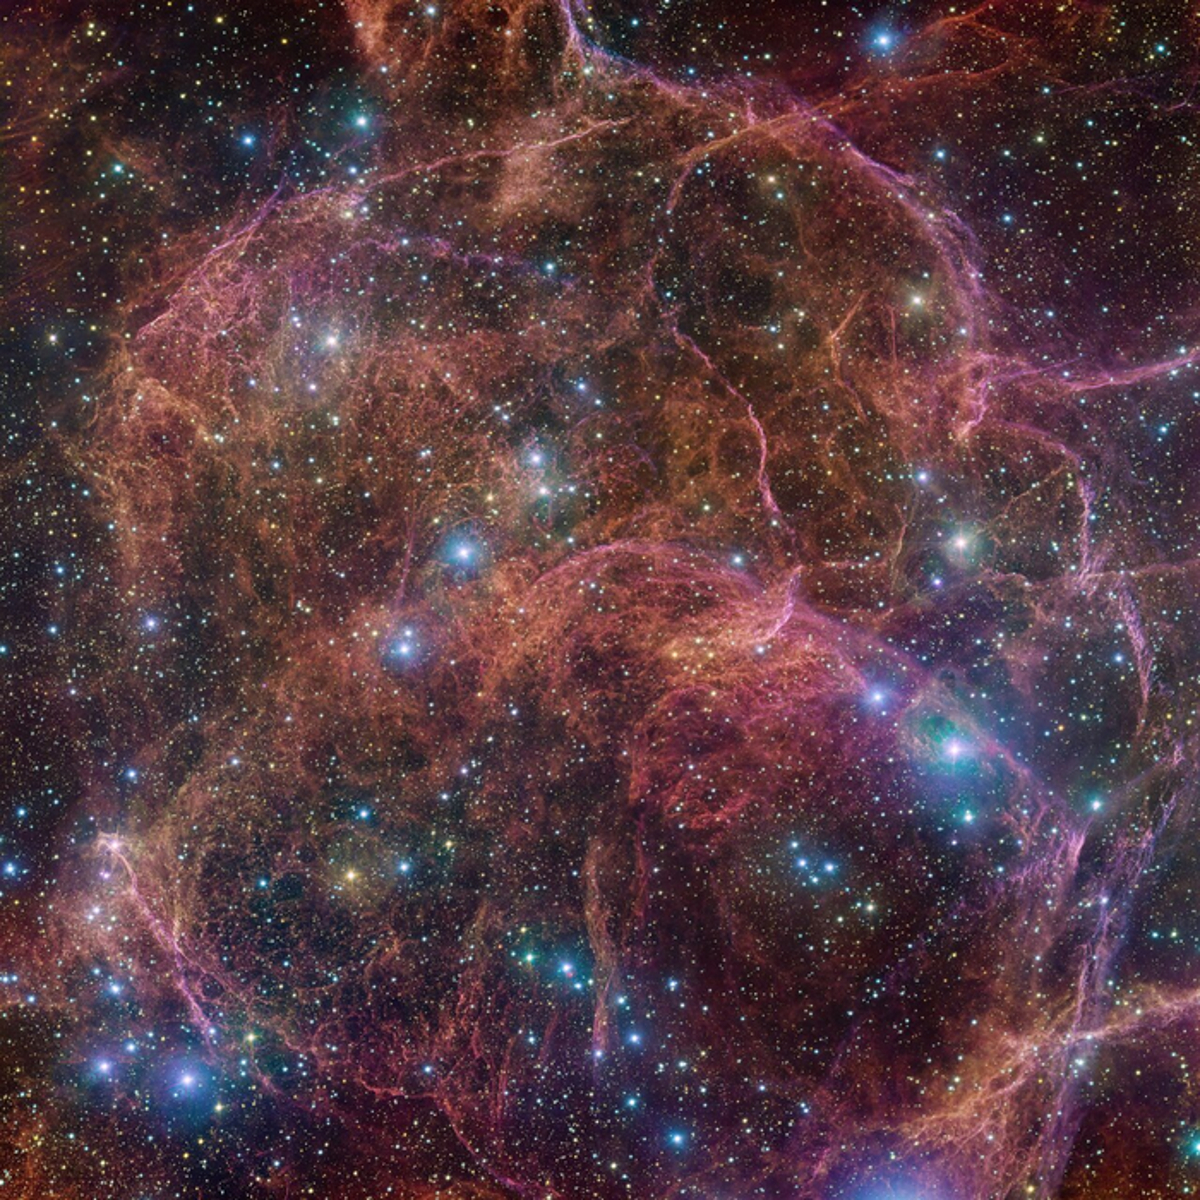 Ghost of a dead star glows pink in new Very Large Telescope image